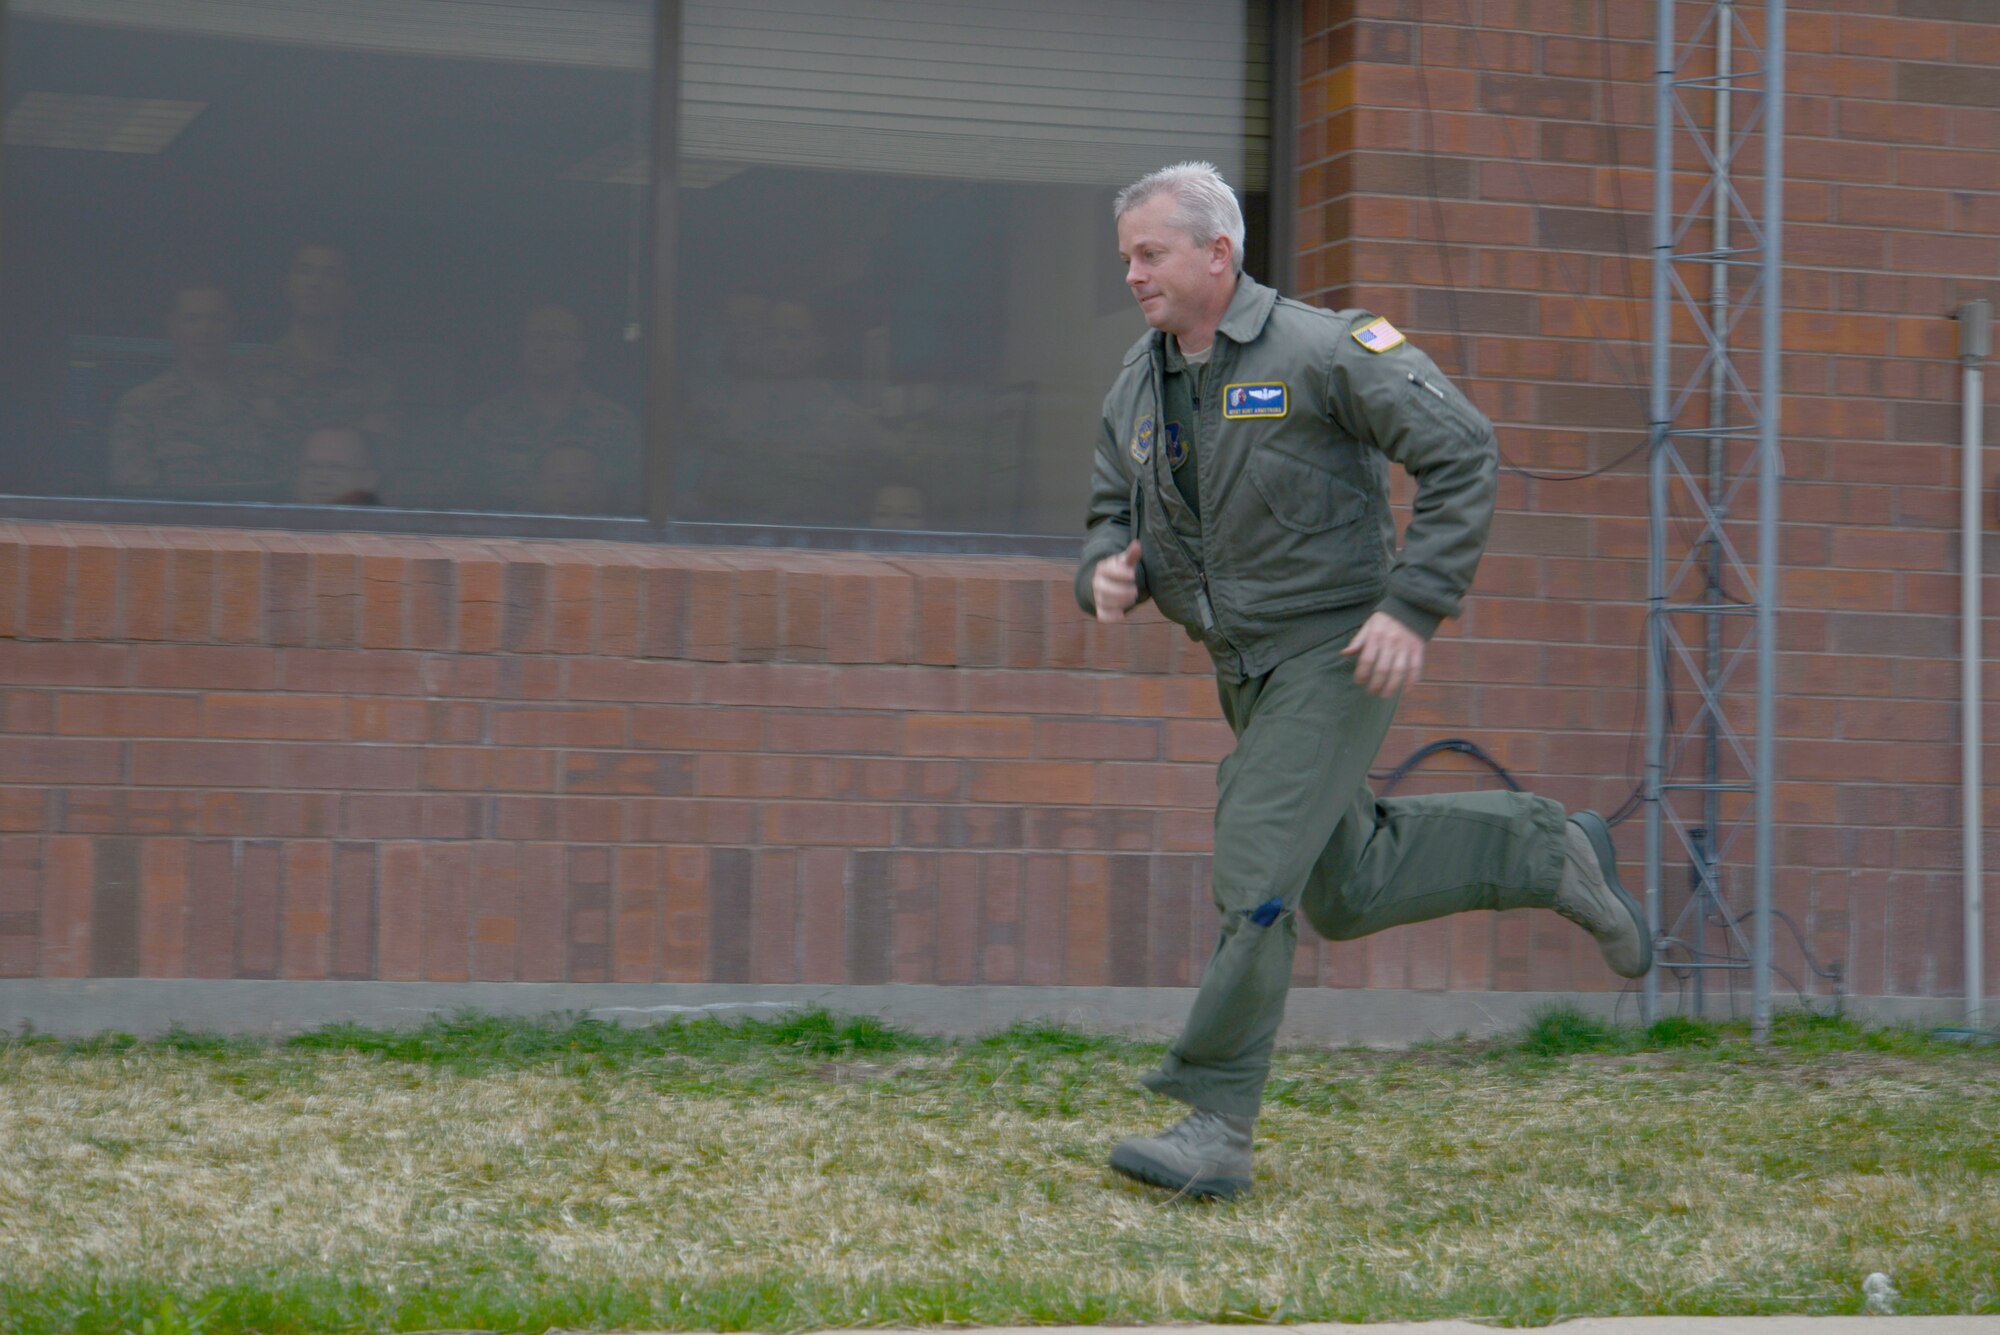 Master Sgt. Kurt Armstrong runs to the flight line following an alert given during an exercise April 6, 2014. (Air National Guard photo by Tech. Sgt. Kelly Collett/RELEASED)